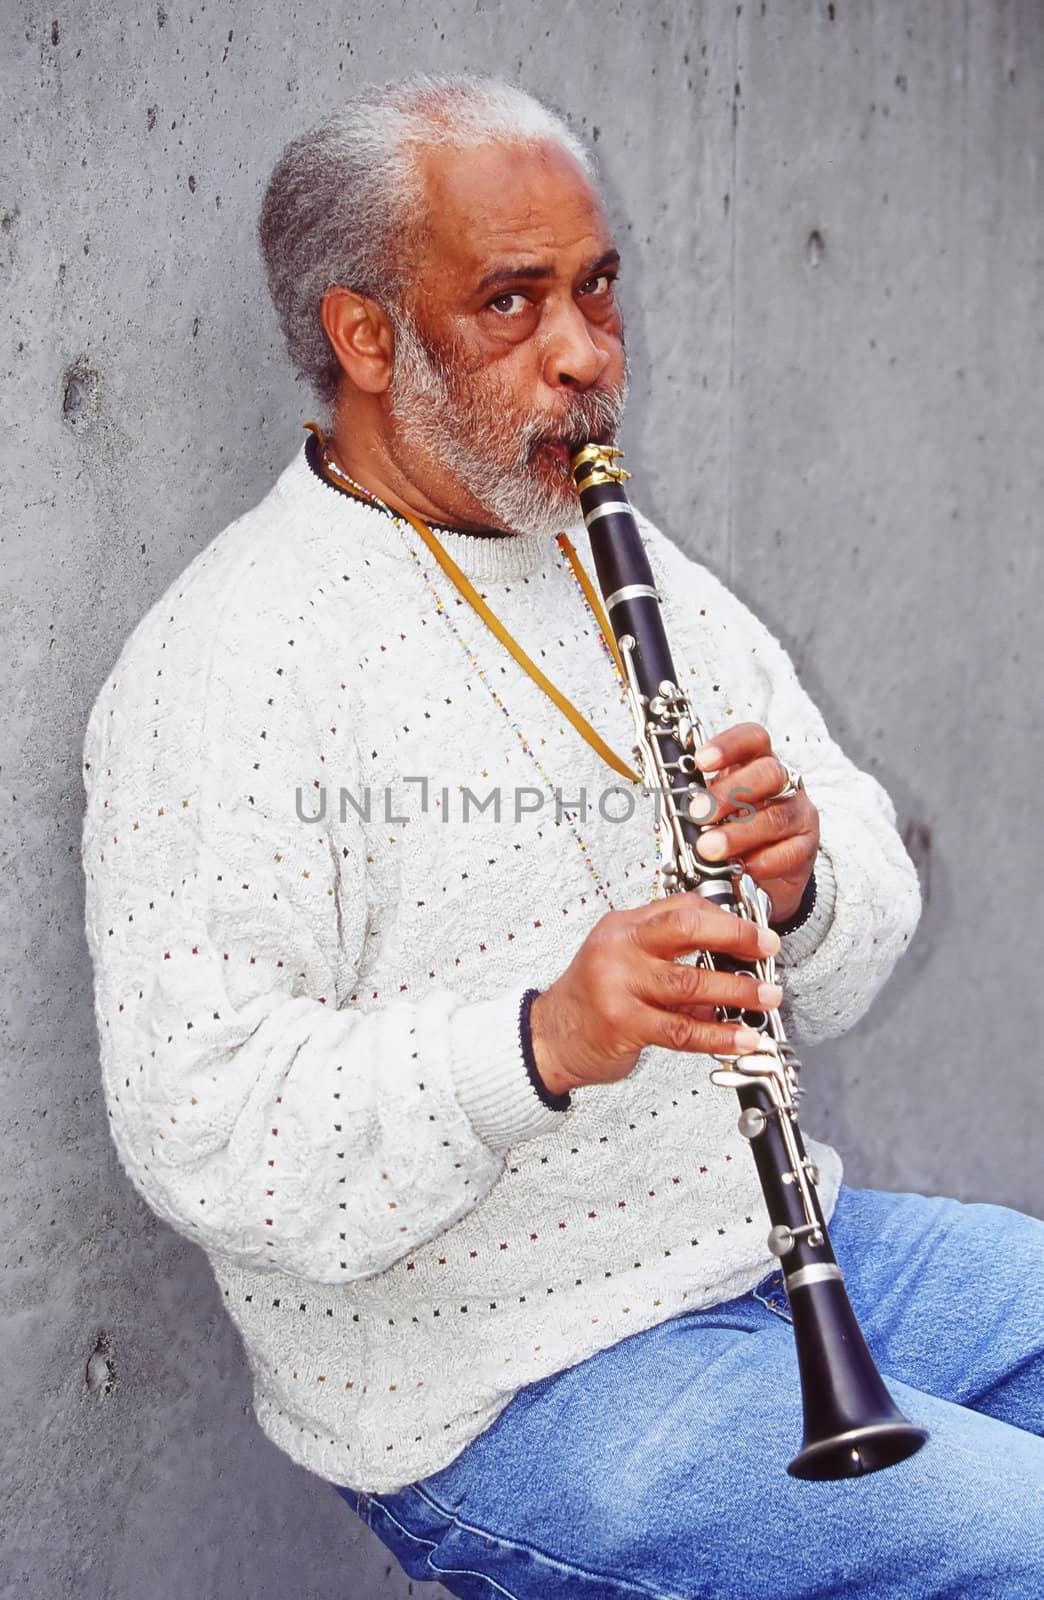 Musician at a jazz festival in seattle, washington